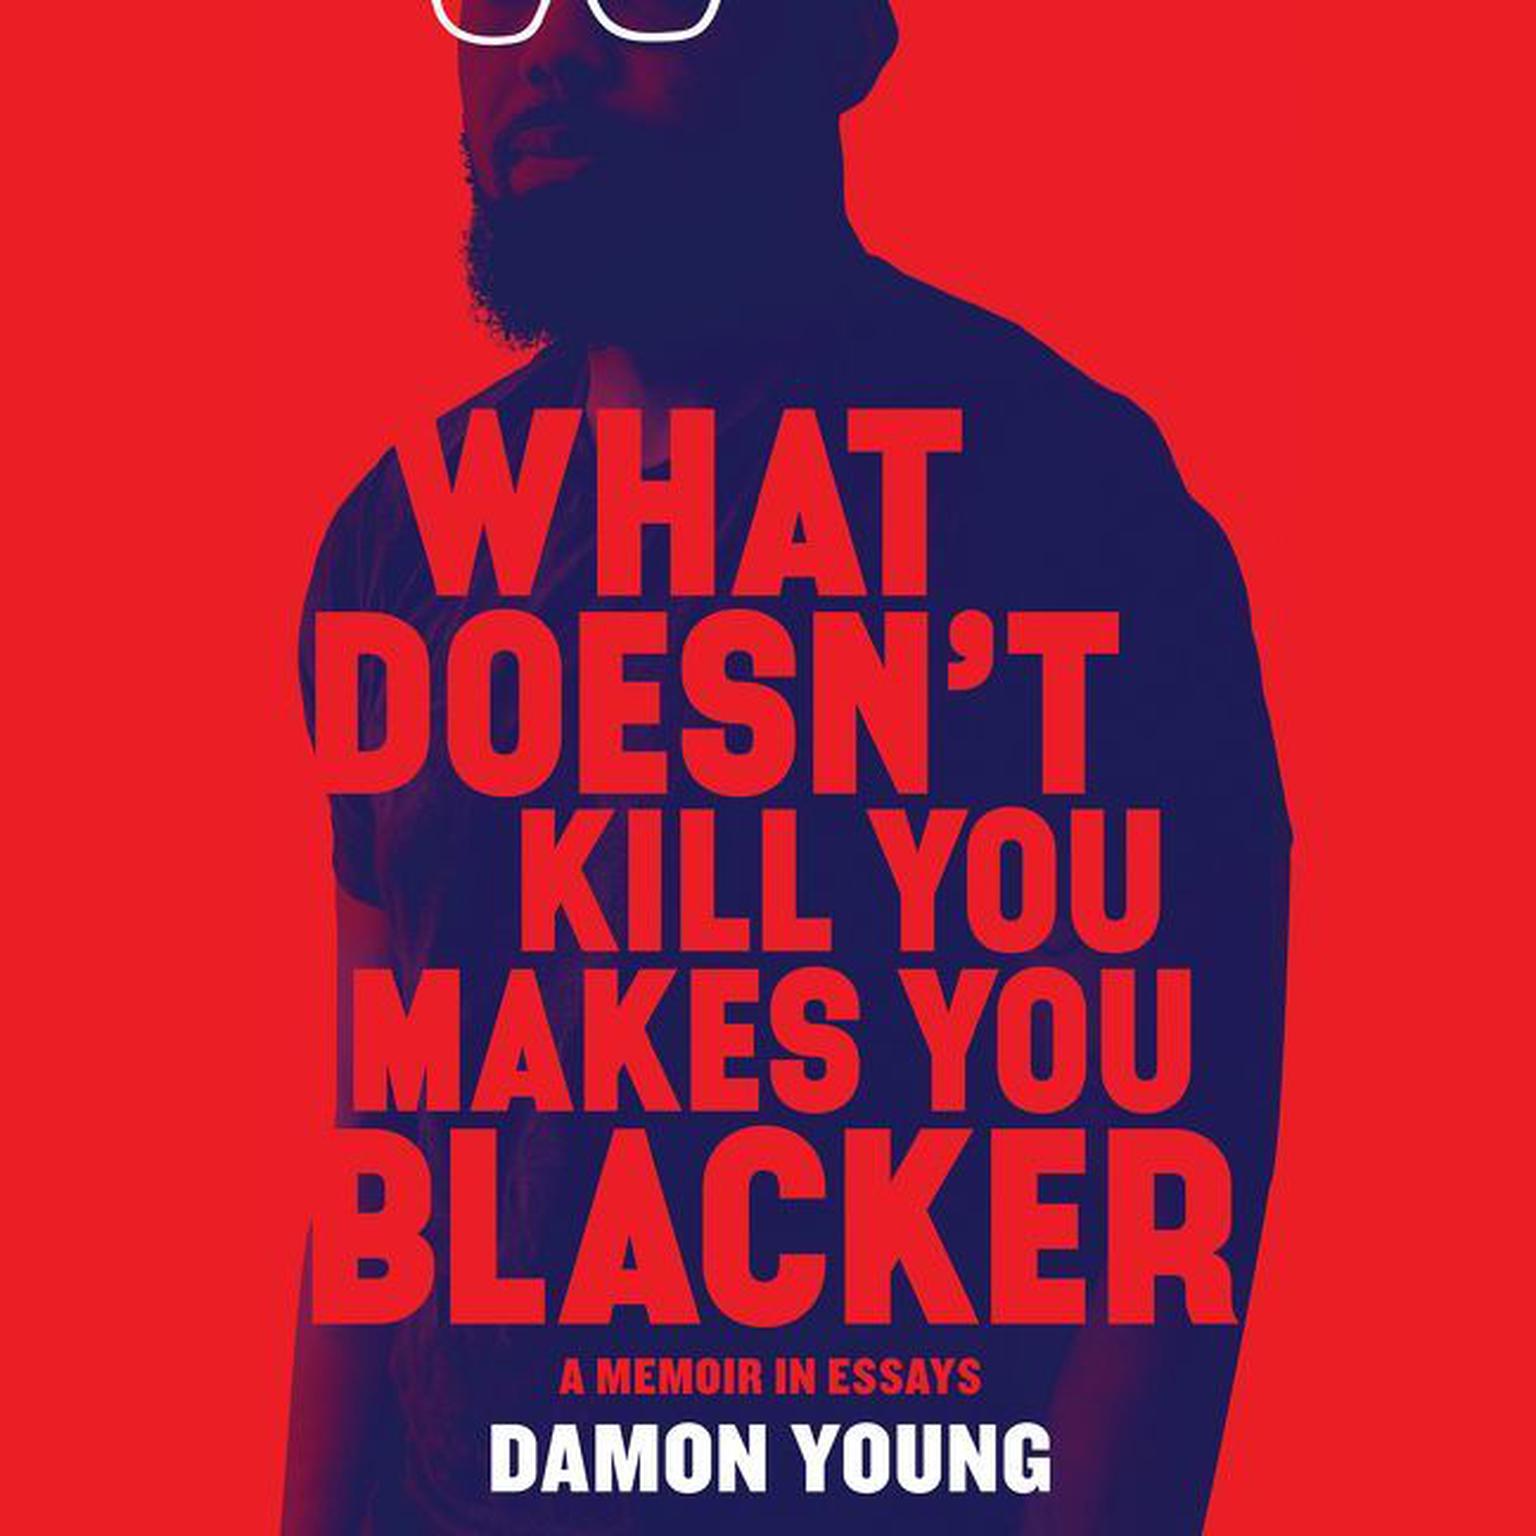 What Doesnt Kill You Makes You Blacker: A Memoir in Essays Audiobook, by Damon Young